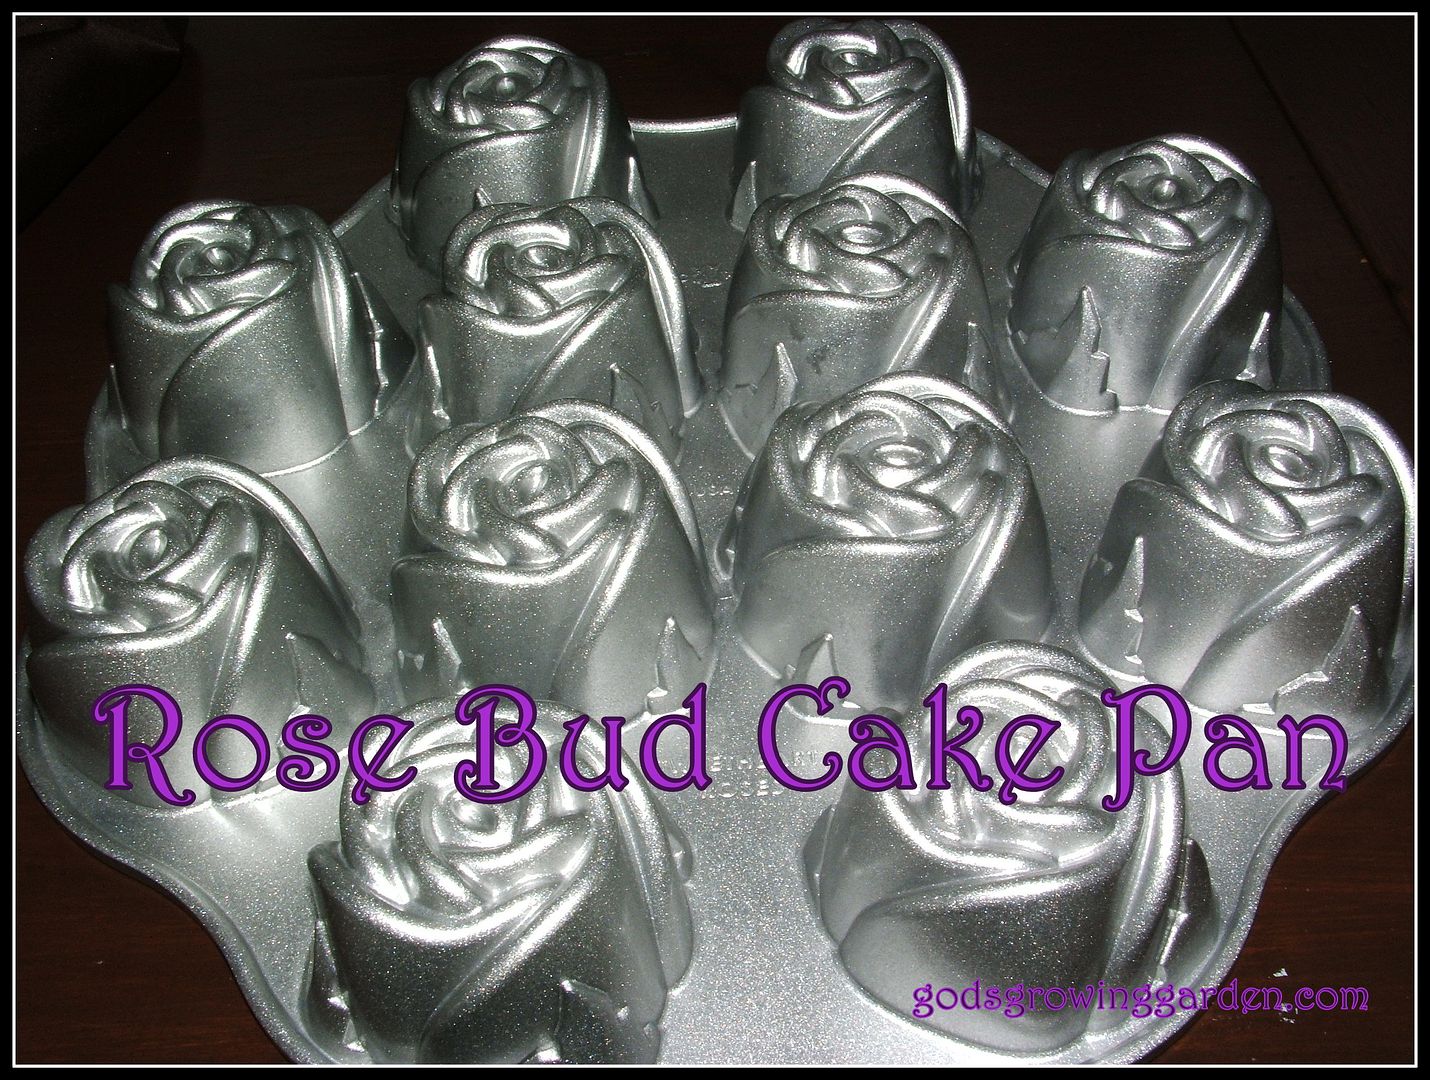 Rose Bud Cake Pan by Angie Ouellette-Tower for godsgrowinggarden.com photo 014_zps713911ec.jpg